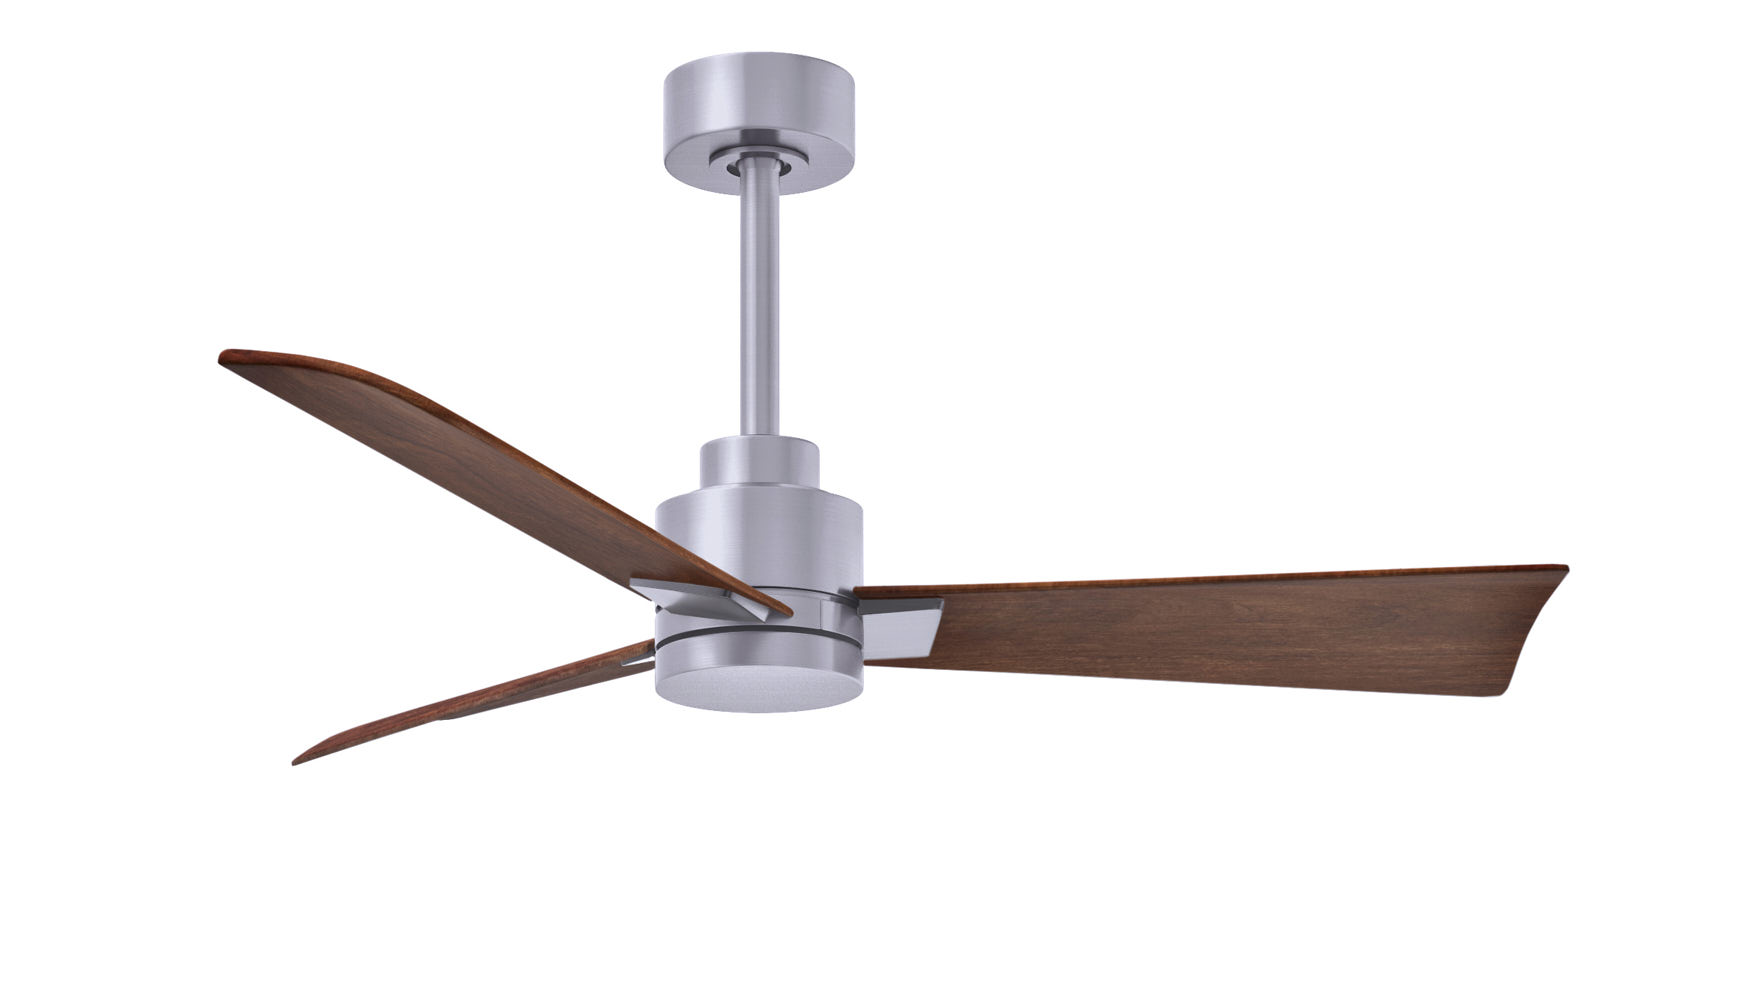 Alessandra ceiling fan in brushed nickel finish with 42